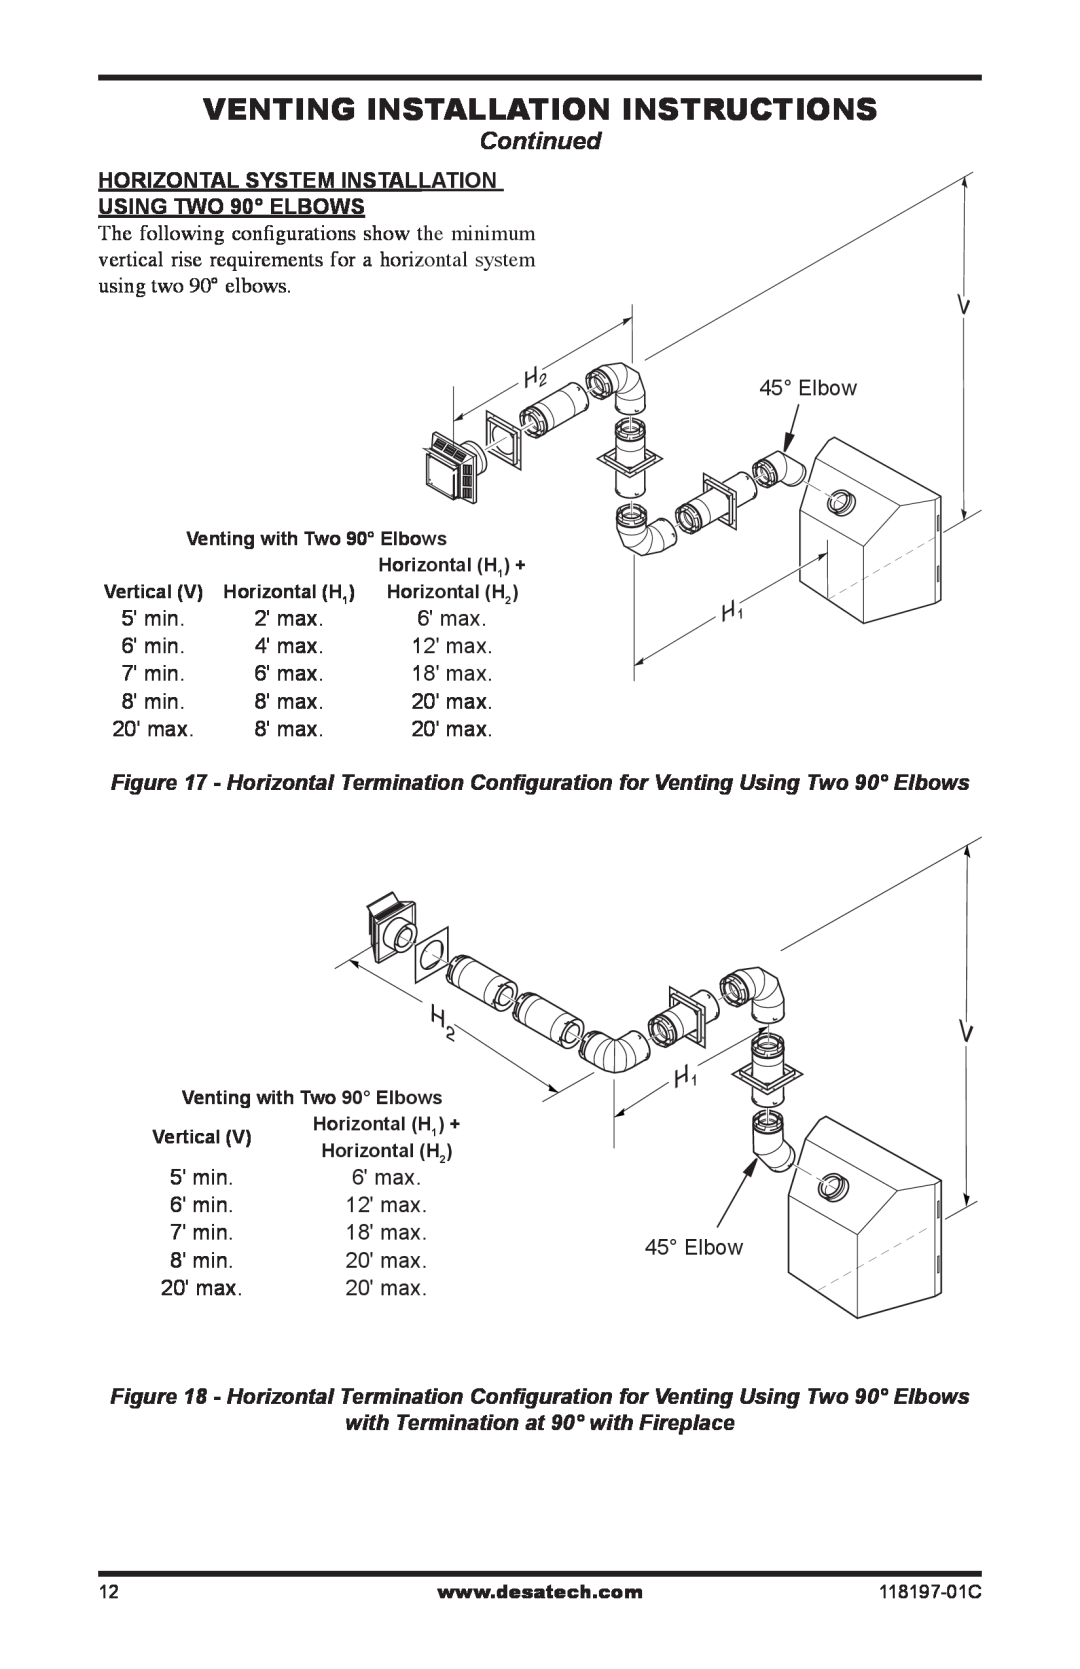 Desa (V)DVC42(B)(H) Venting Installation instructions, Continued, HORIZONTAL SYSTEM INSTALLATION USING TWO 90 ELBOWS 